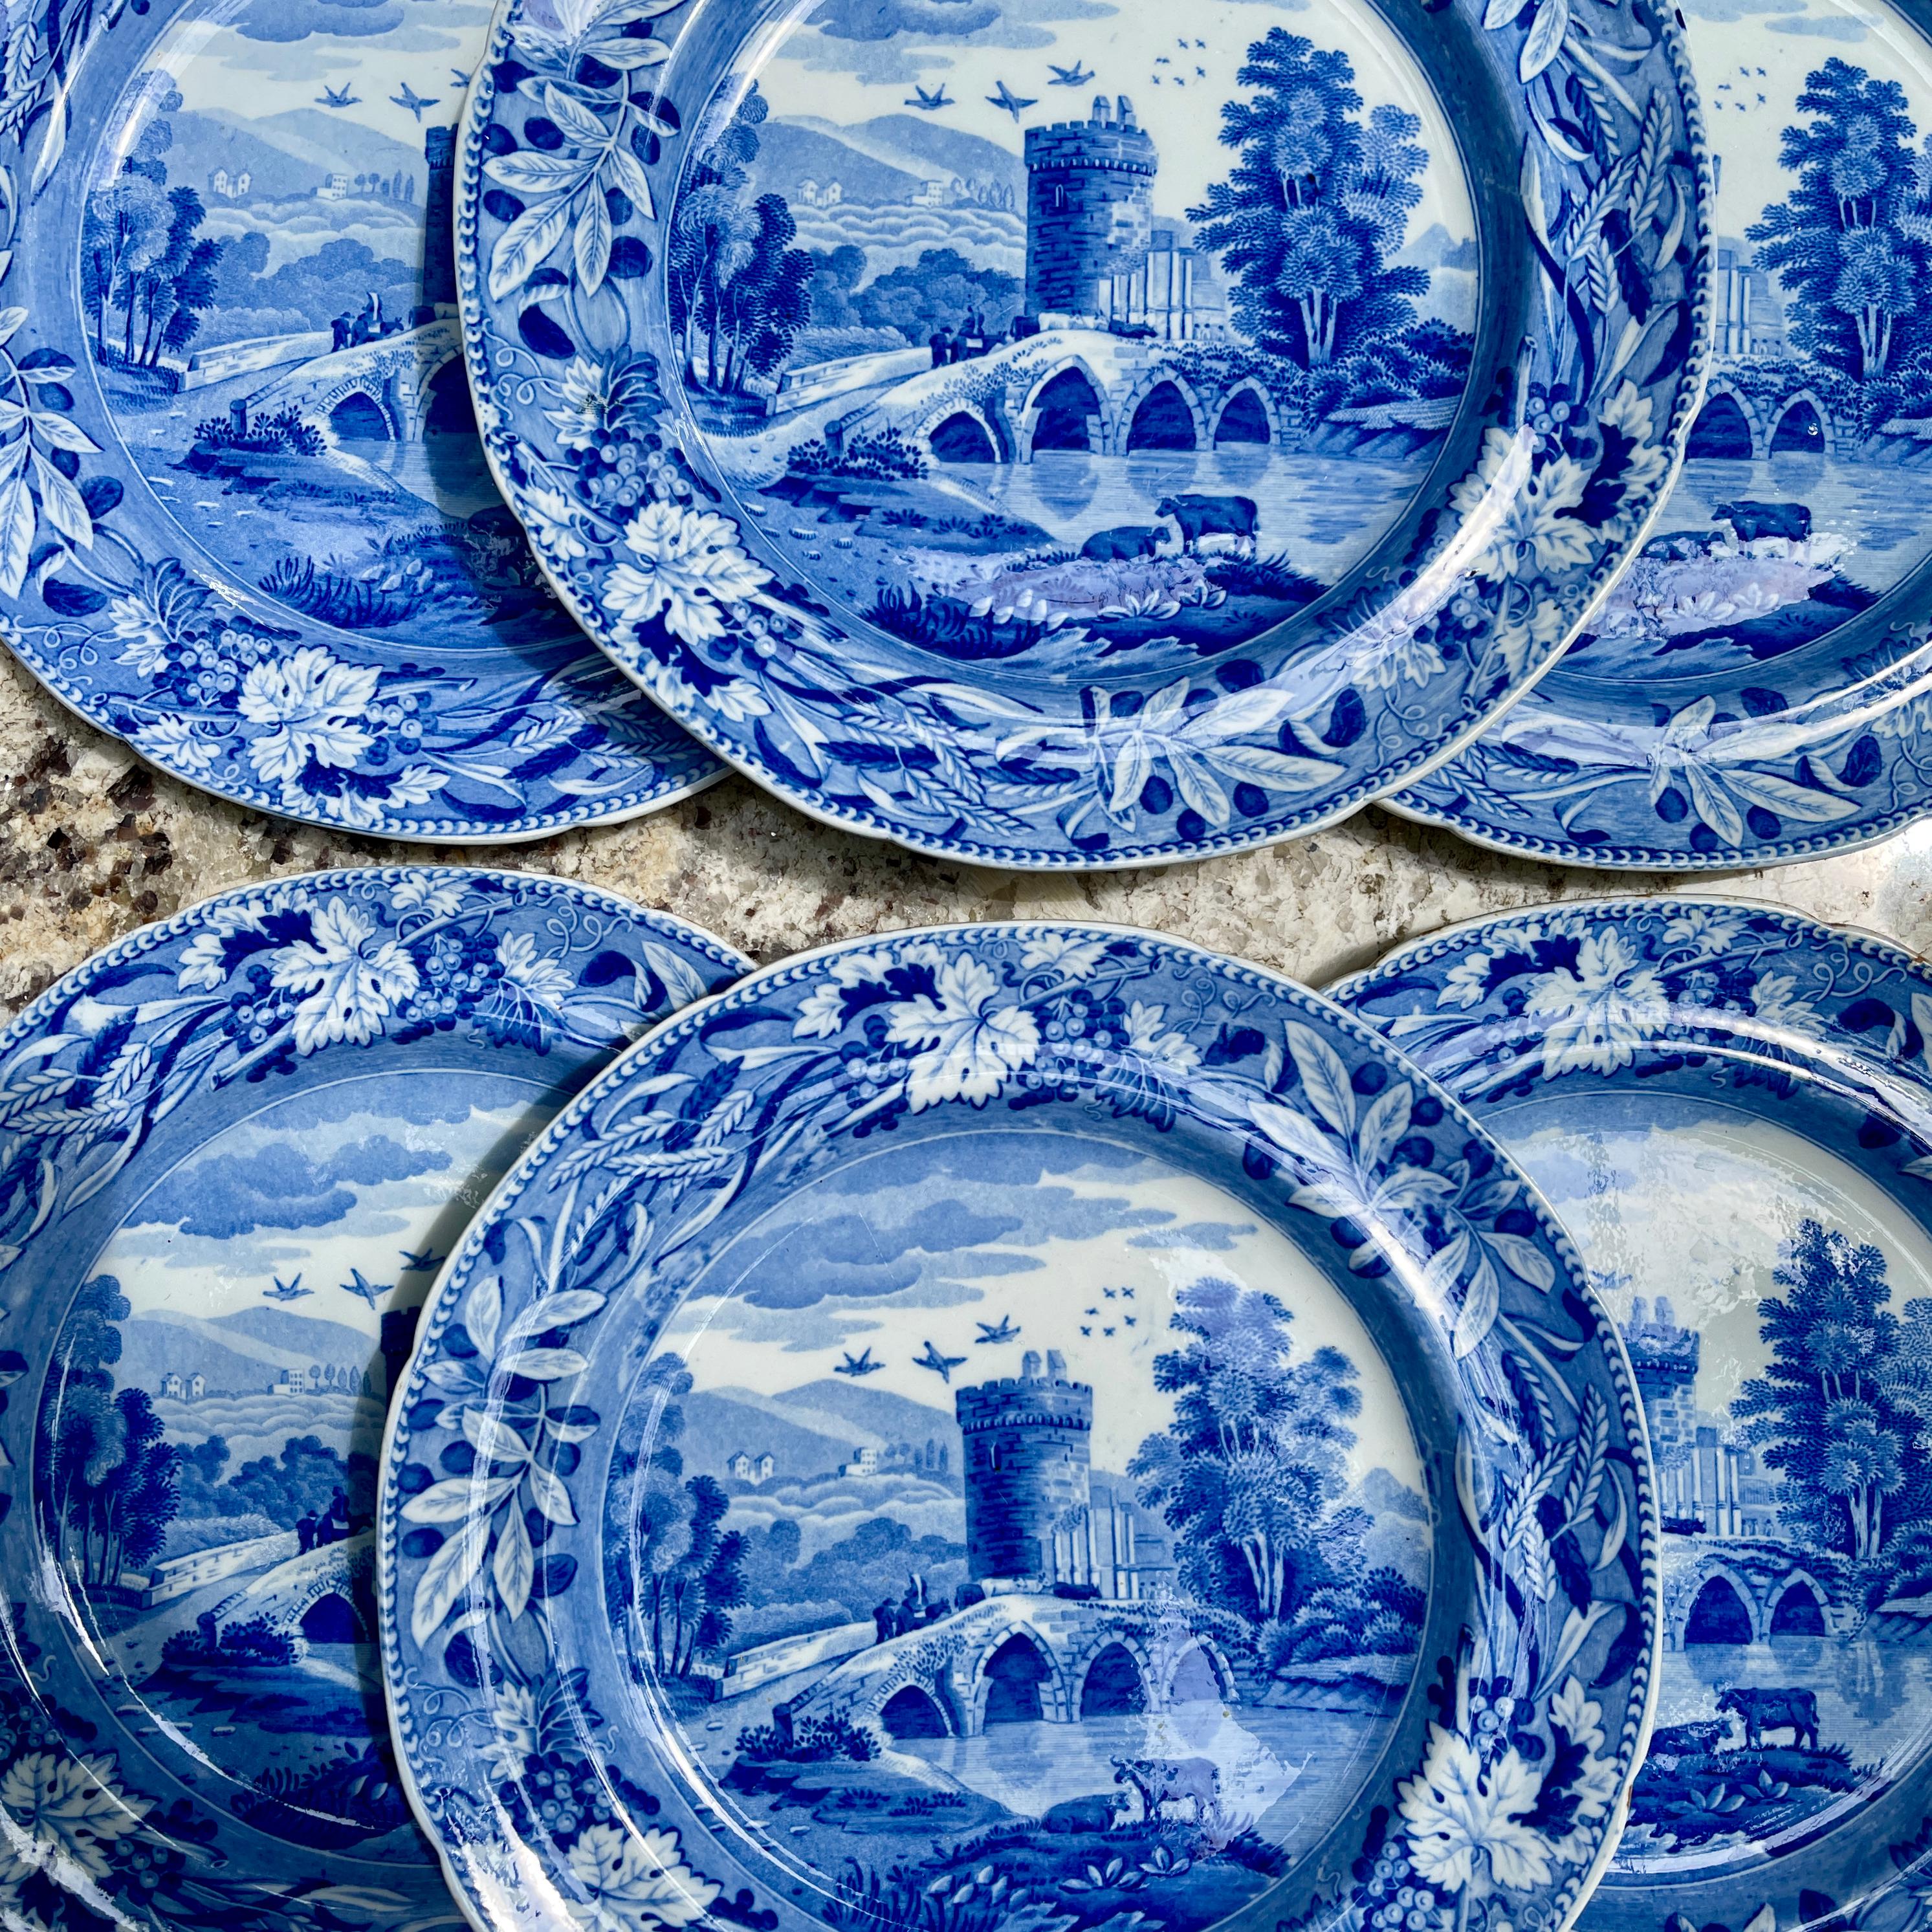 A set of six ‘Lucano’ or ‘Bridge of Lucano’ pattern dinner plates, Spode, Stoke-on-Trent, Staffordshire England, Circa, 1820-1830

Blue on white transfer printed earthenware, showing an Italian scene of a four-arch bridge, a round stone tower,